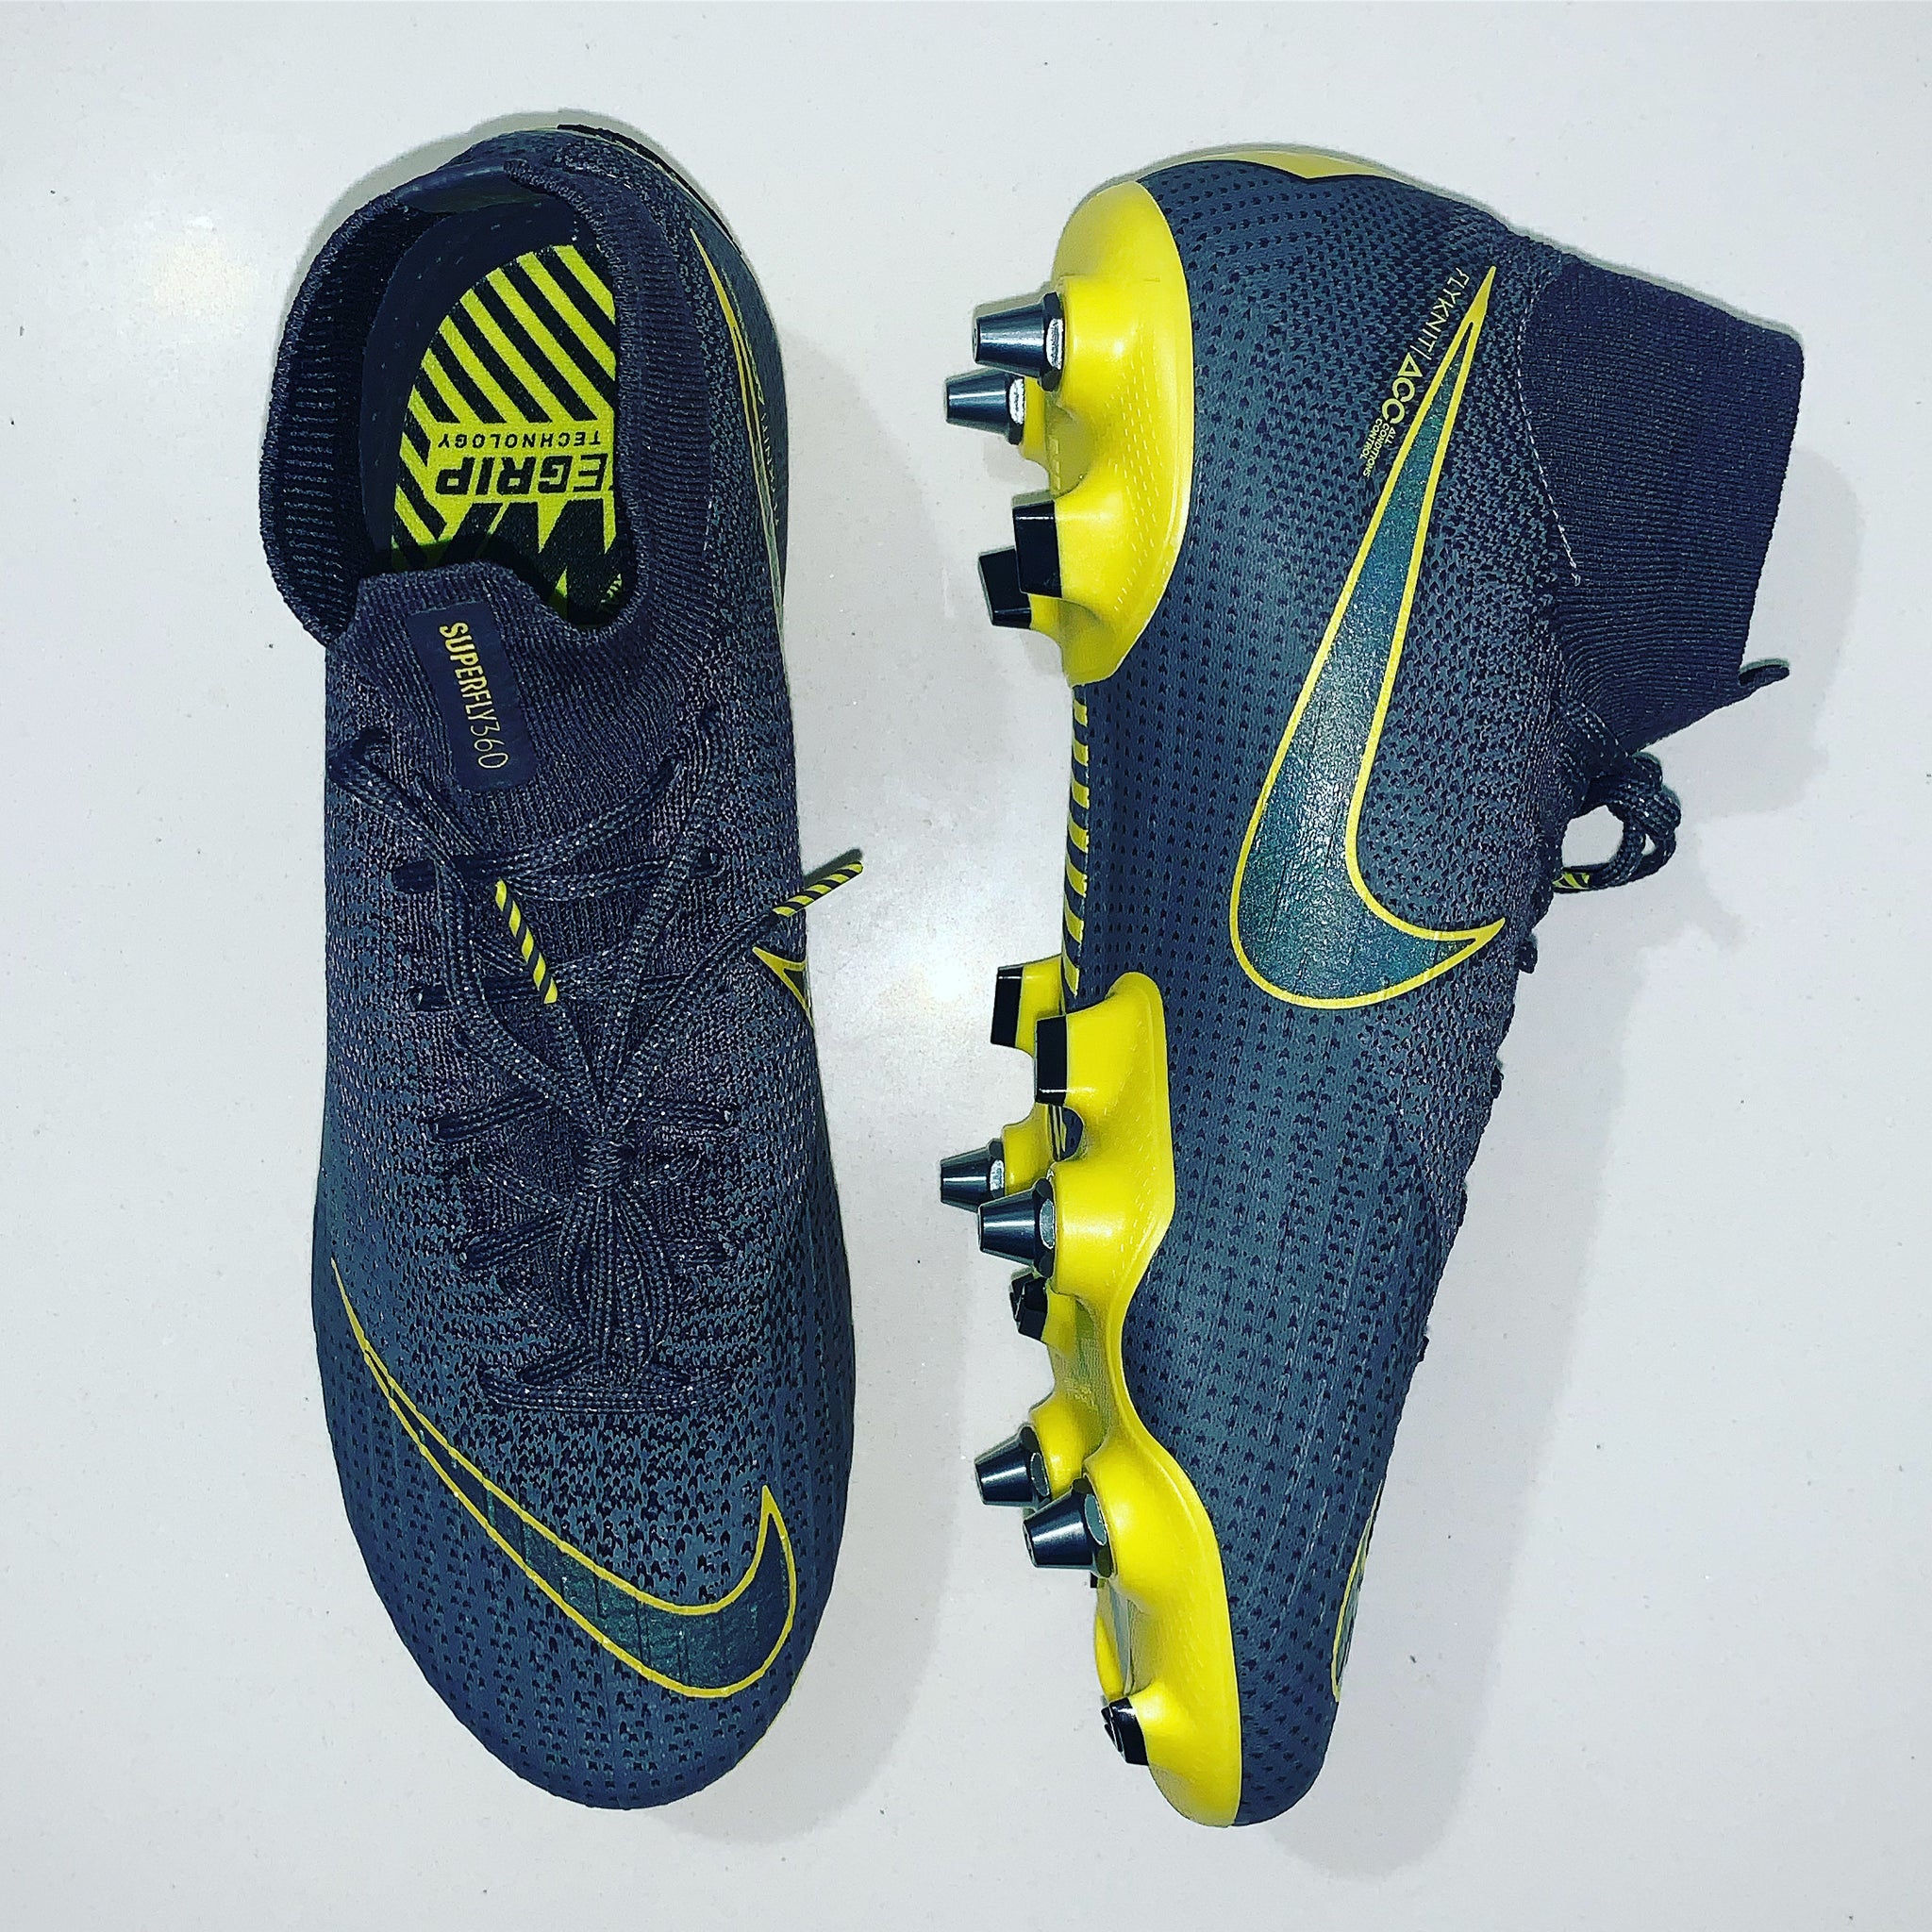 Mercurial Superfly 6 SG PRO 'Game Over' Issue) – The Boot Hive